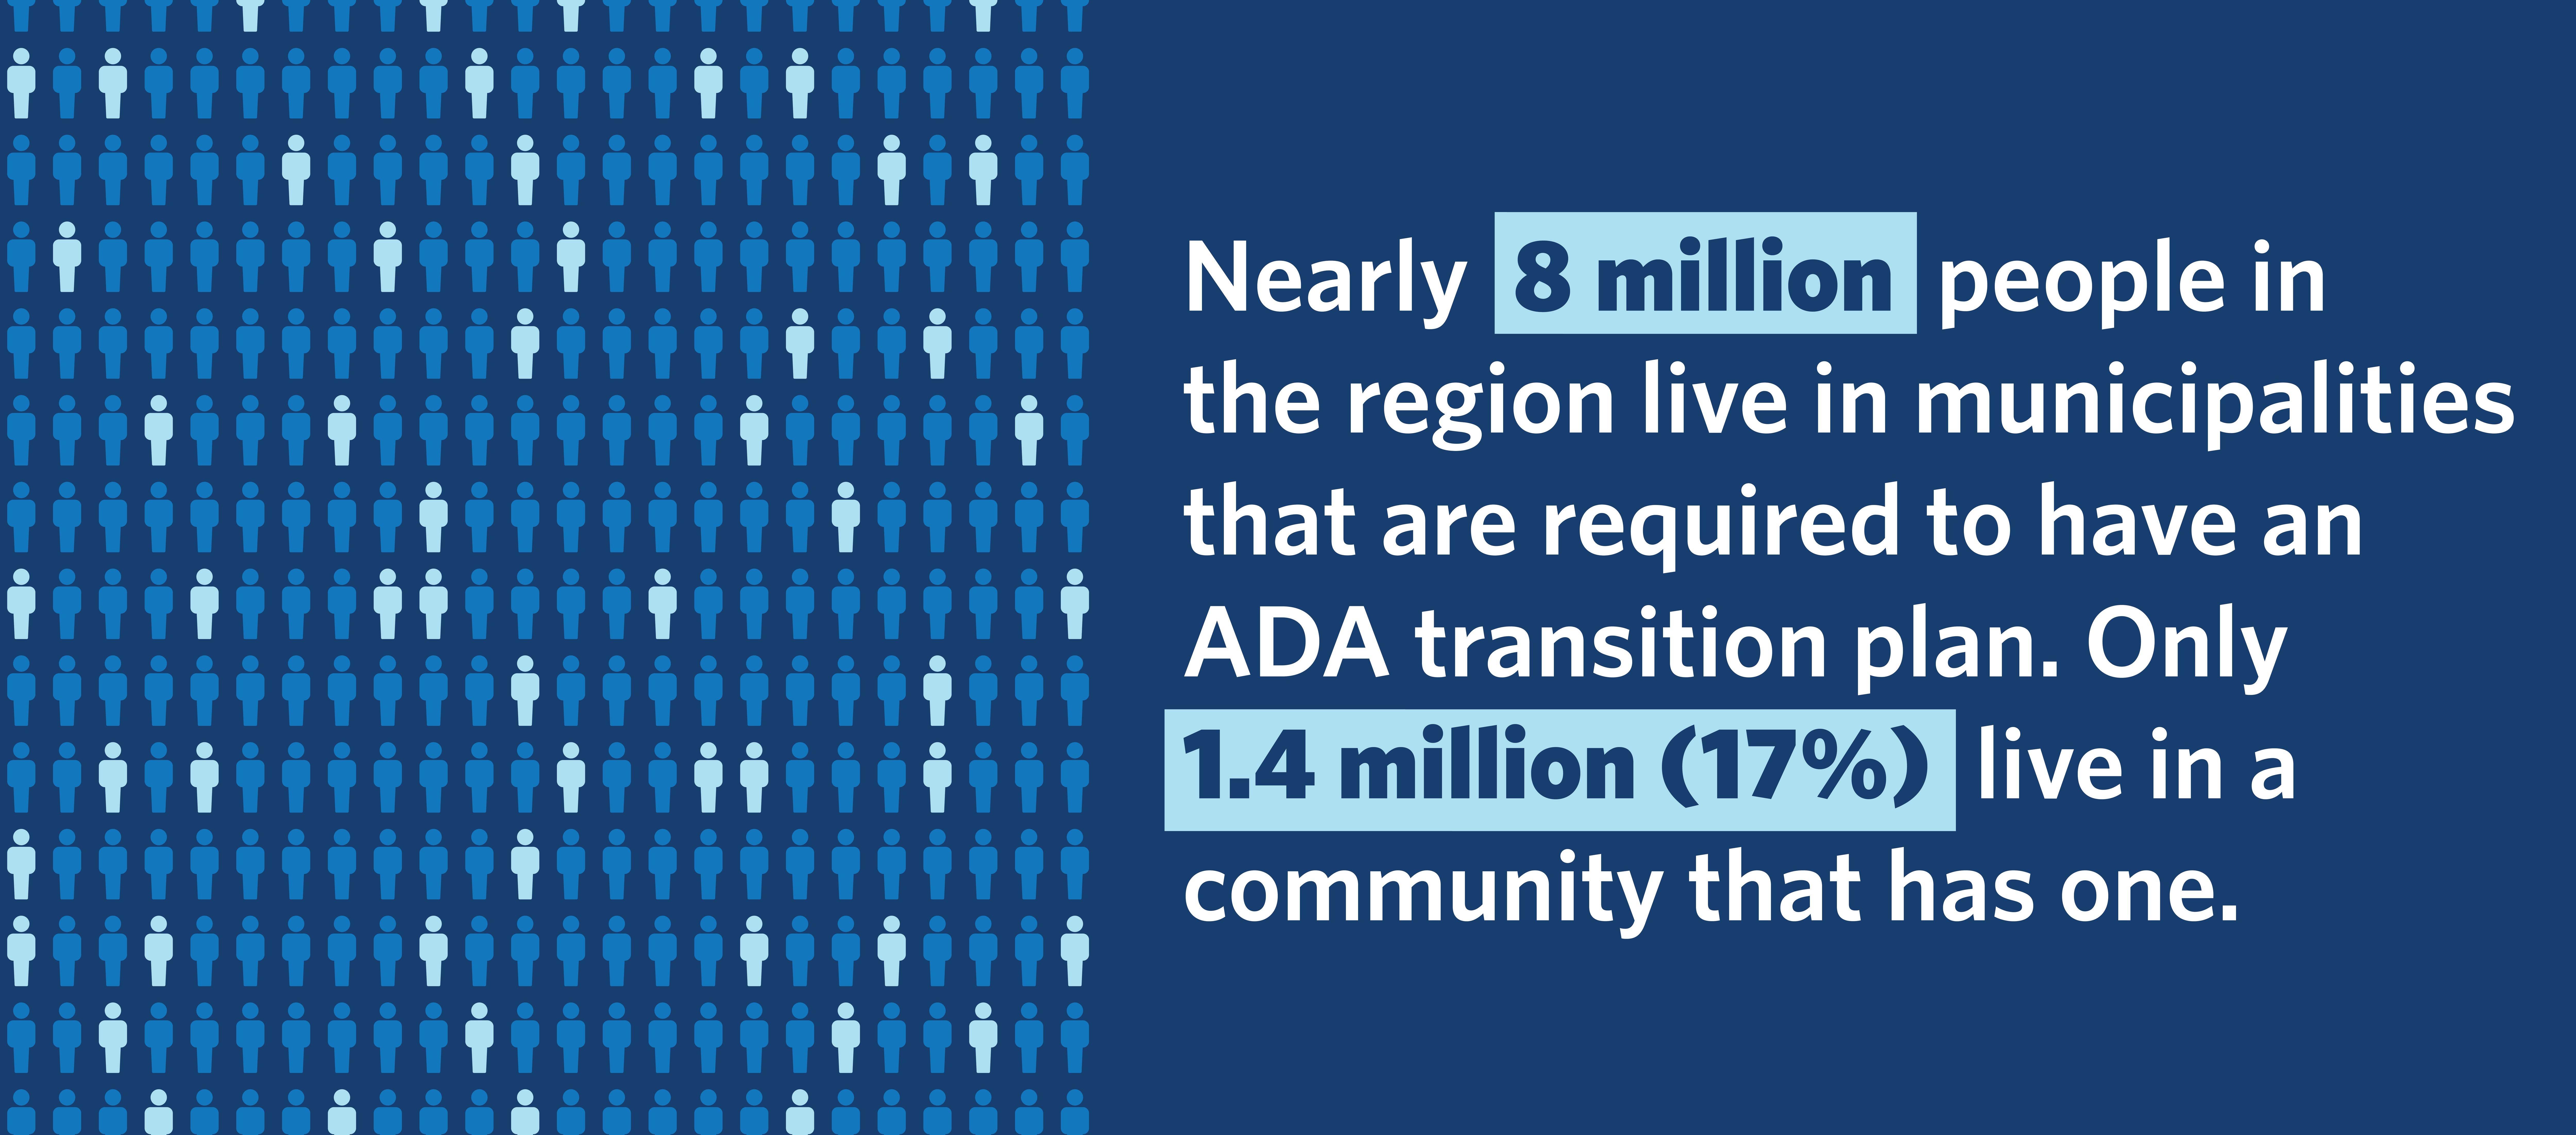 Infographic with small people icons in lines on the left with a small proportion in a lighter color. Text on the right reads: Nearly 8 million people in the region live in municipalities that are required to have an ADA transition plan. Only 1.4 million (17%) live in a community that has one.